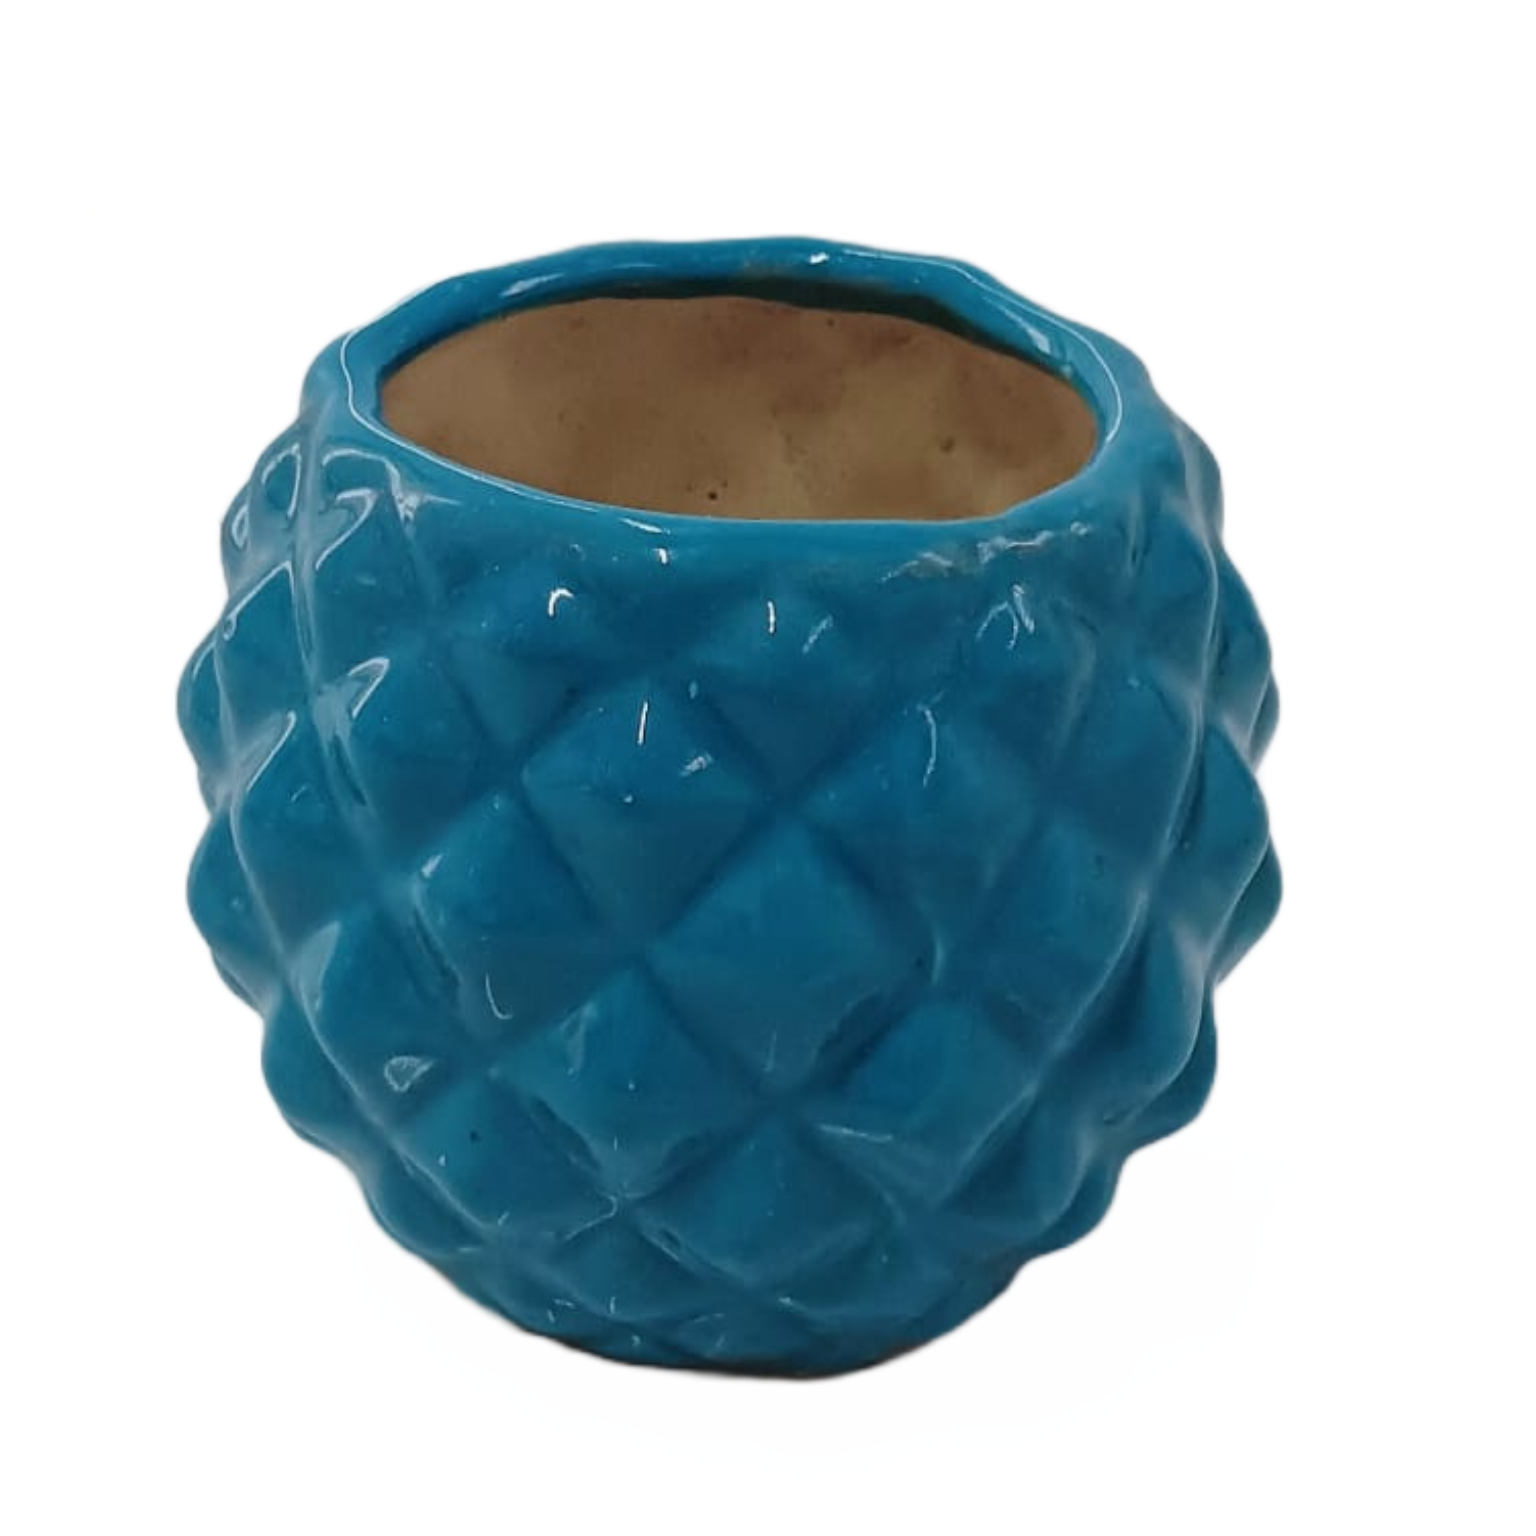 Purchase Diamond Ceramic Pots Online - Chic and Functional Planters for Every Setting